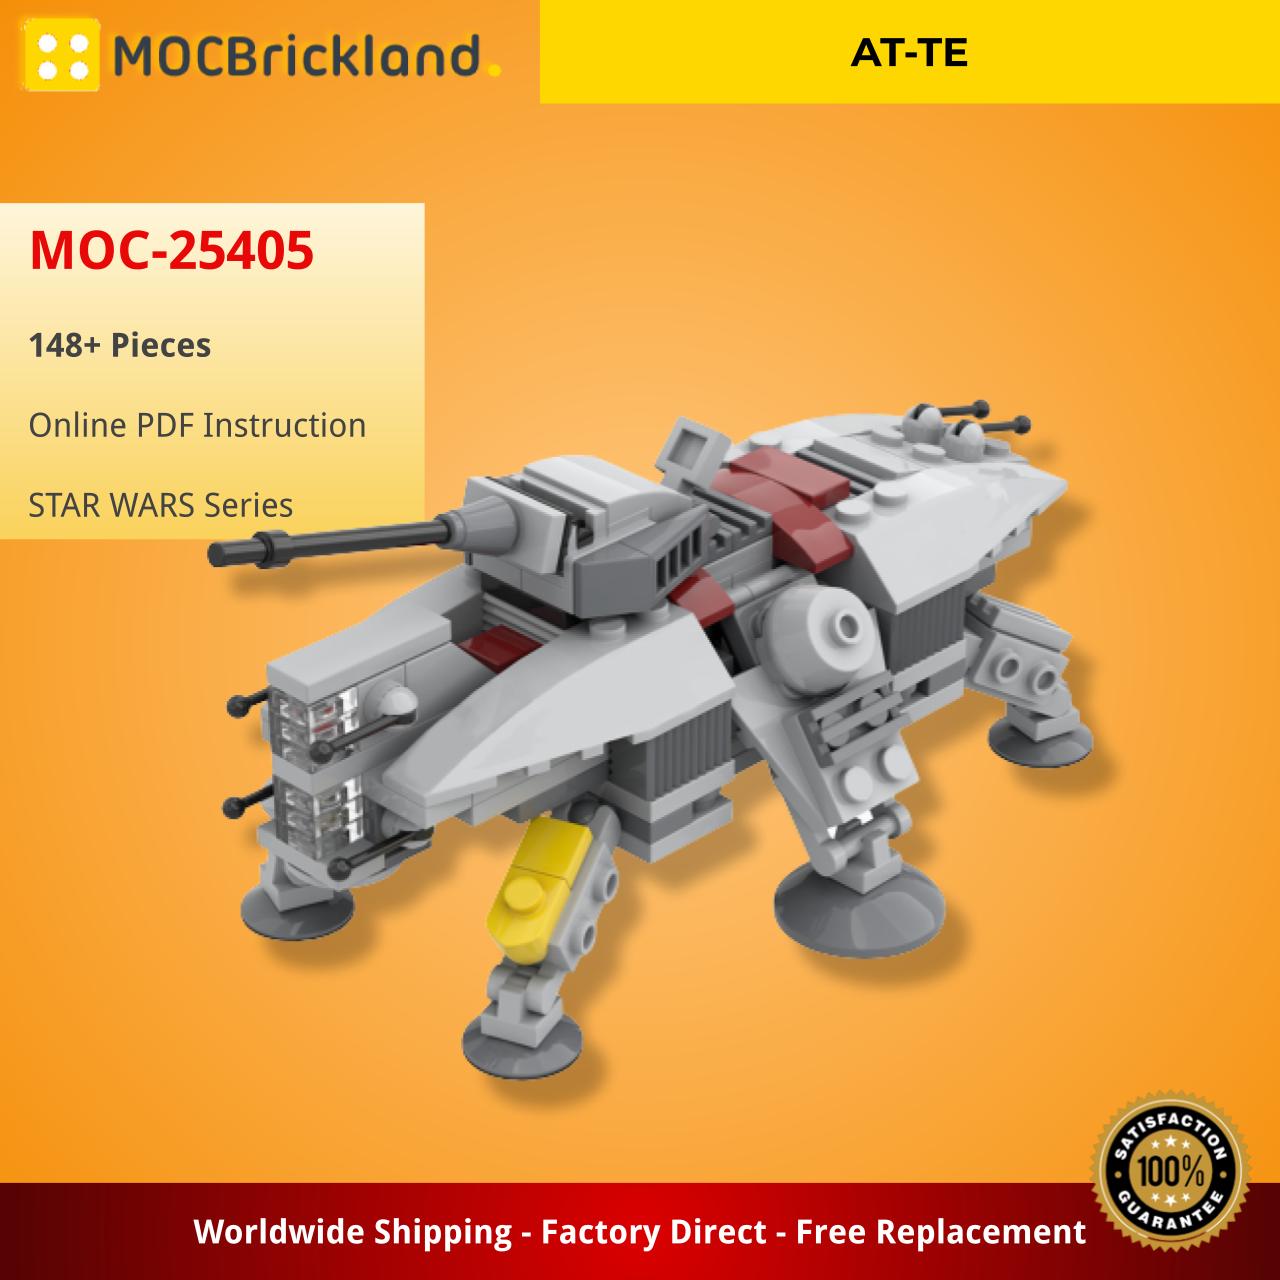 AT-TE STAR WARS MOC-25405 with 148 pieces